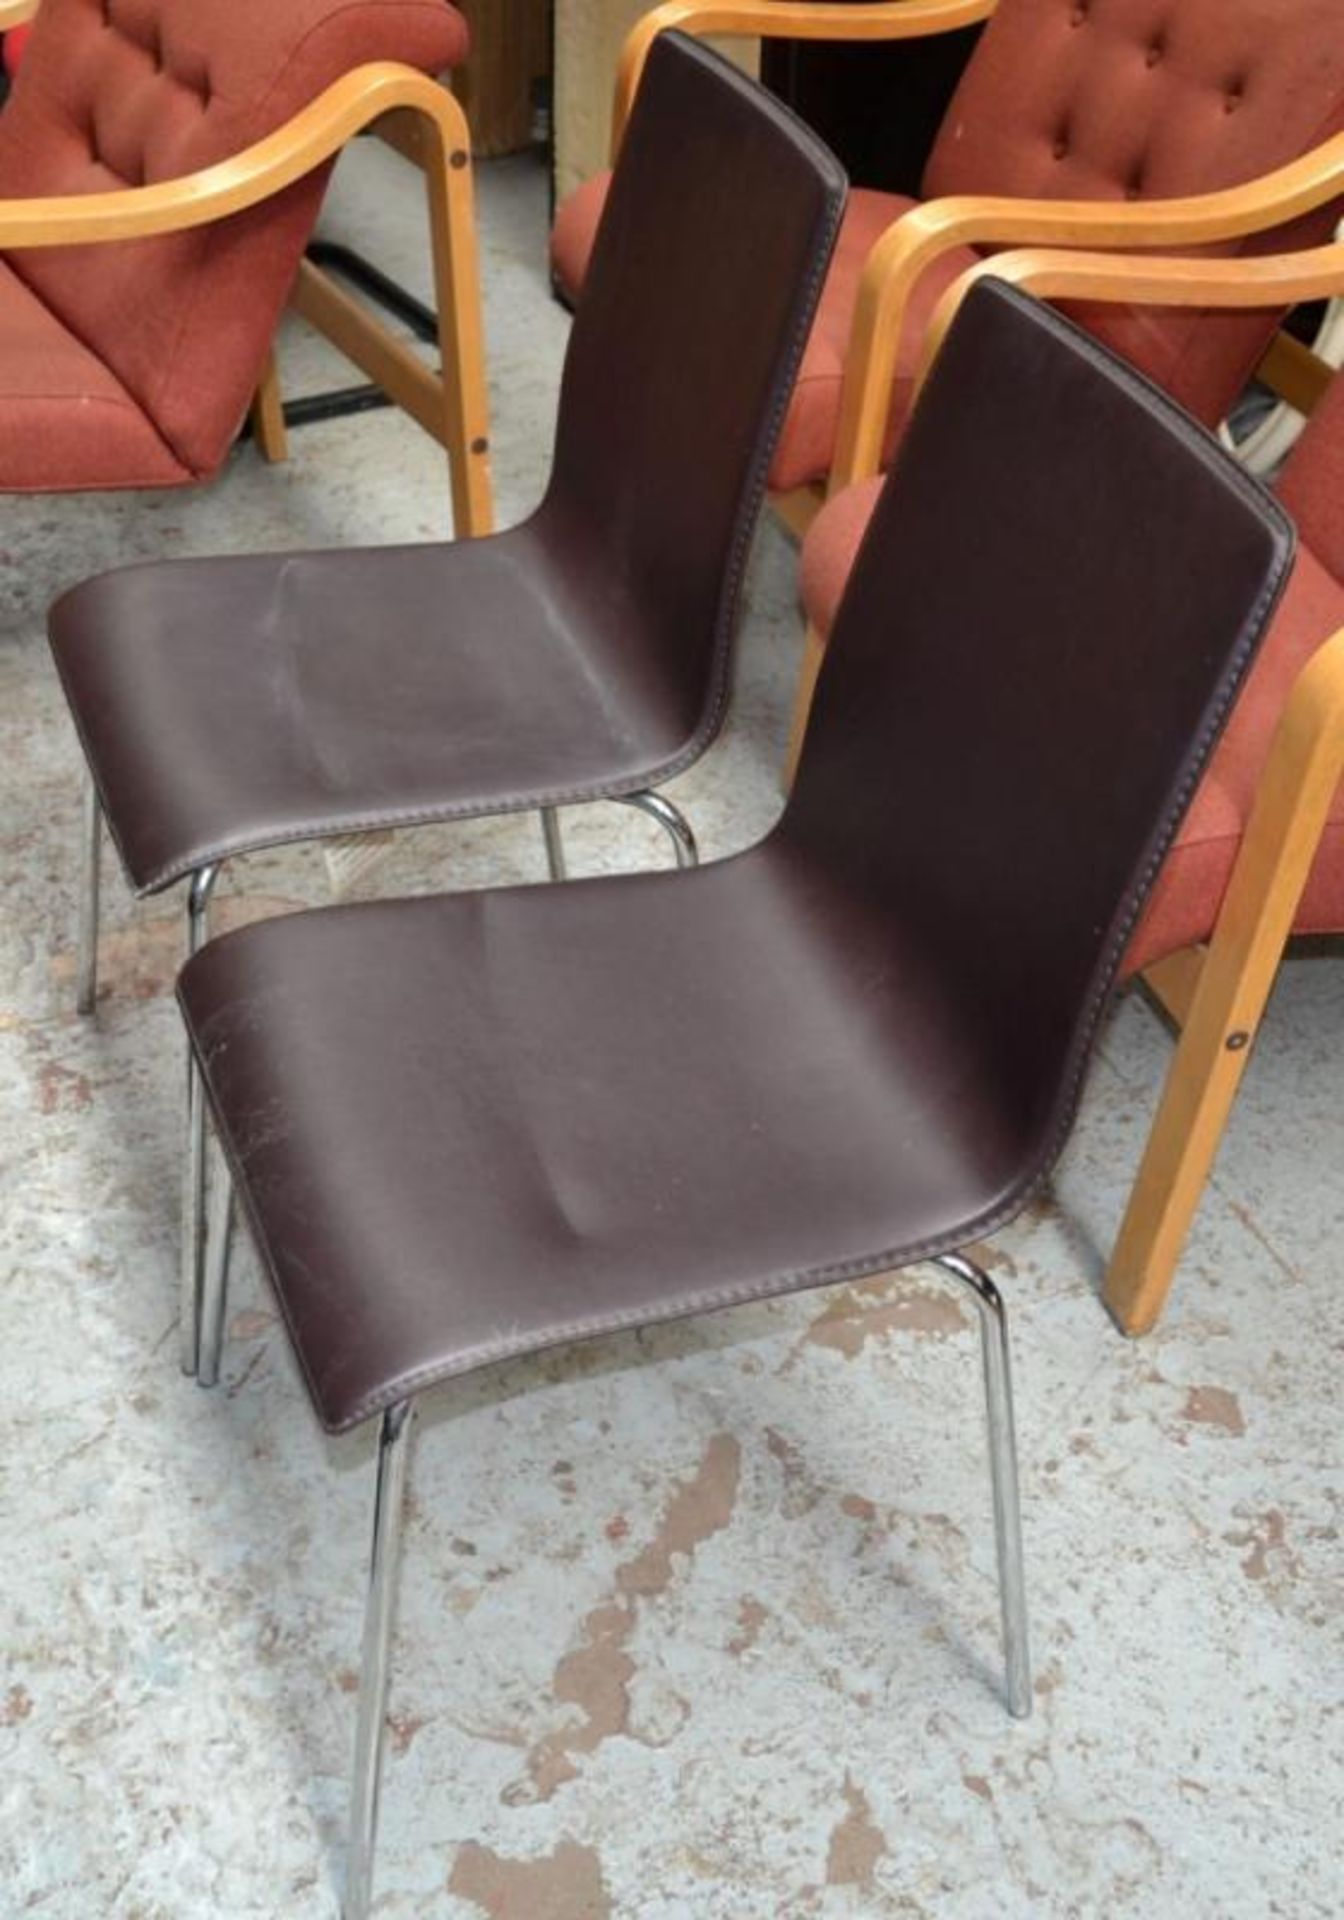 2 x Faux Leather Dining Chairs - Brown with Chrome Legs - H85 x W41 x D44cm - Ref: MWI018 - - Image 3 of 6